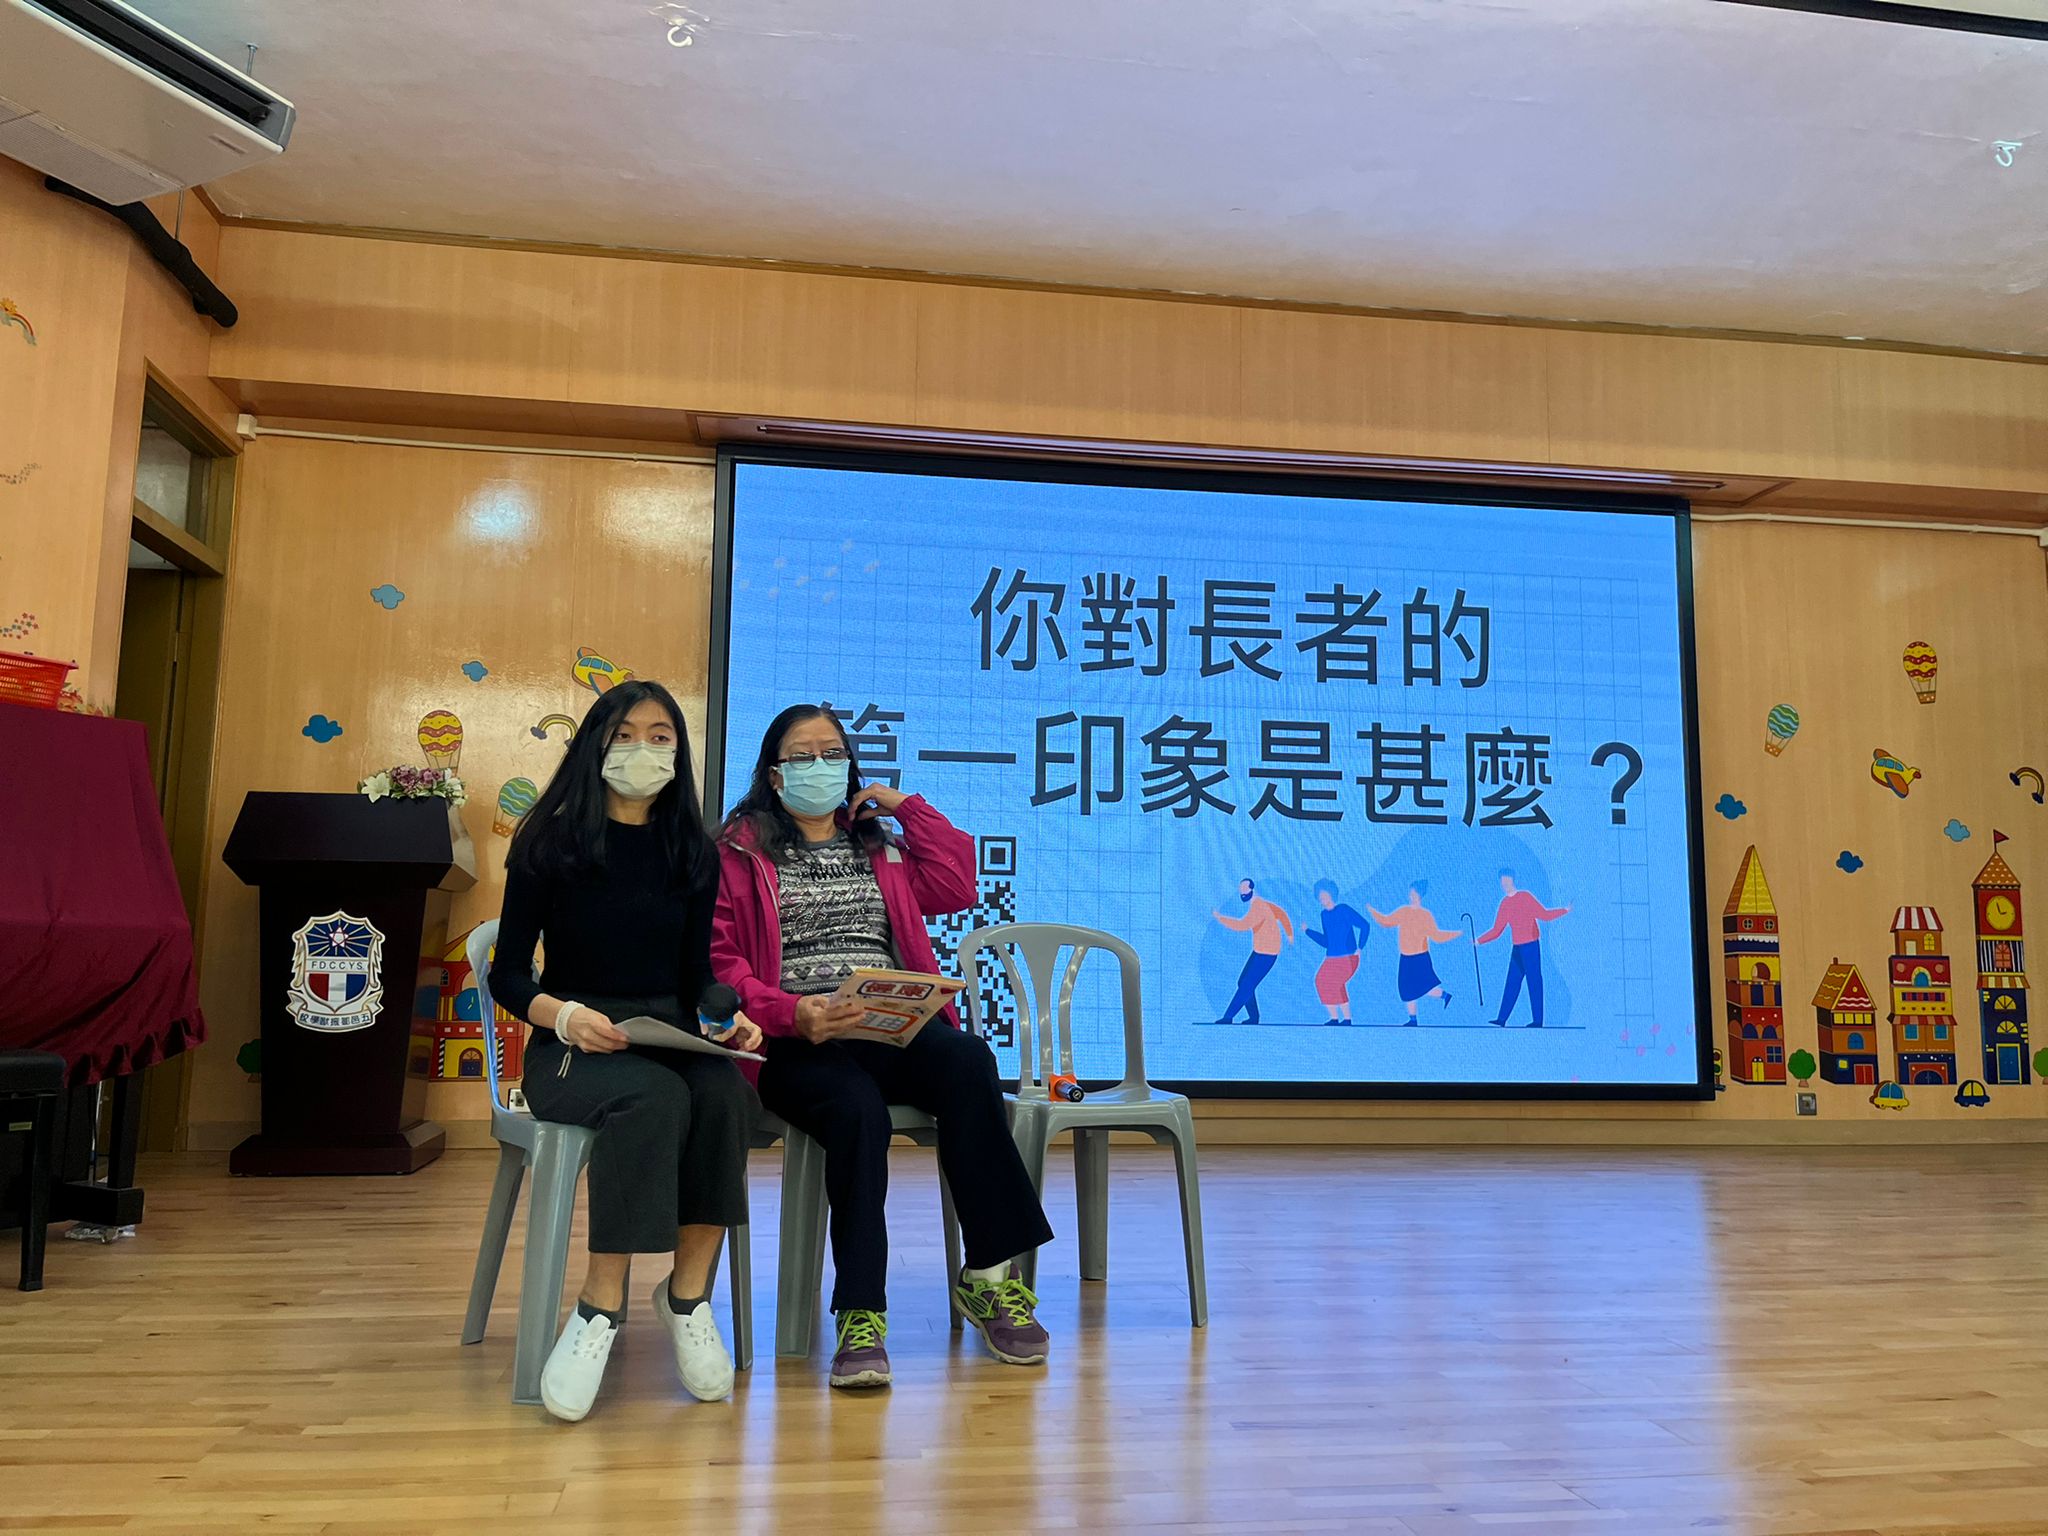 Elder Person Life Library: Elder person were sharing their story on stage